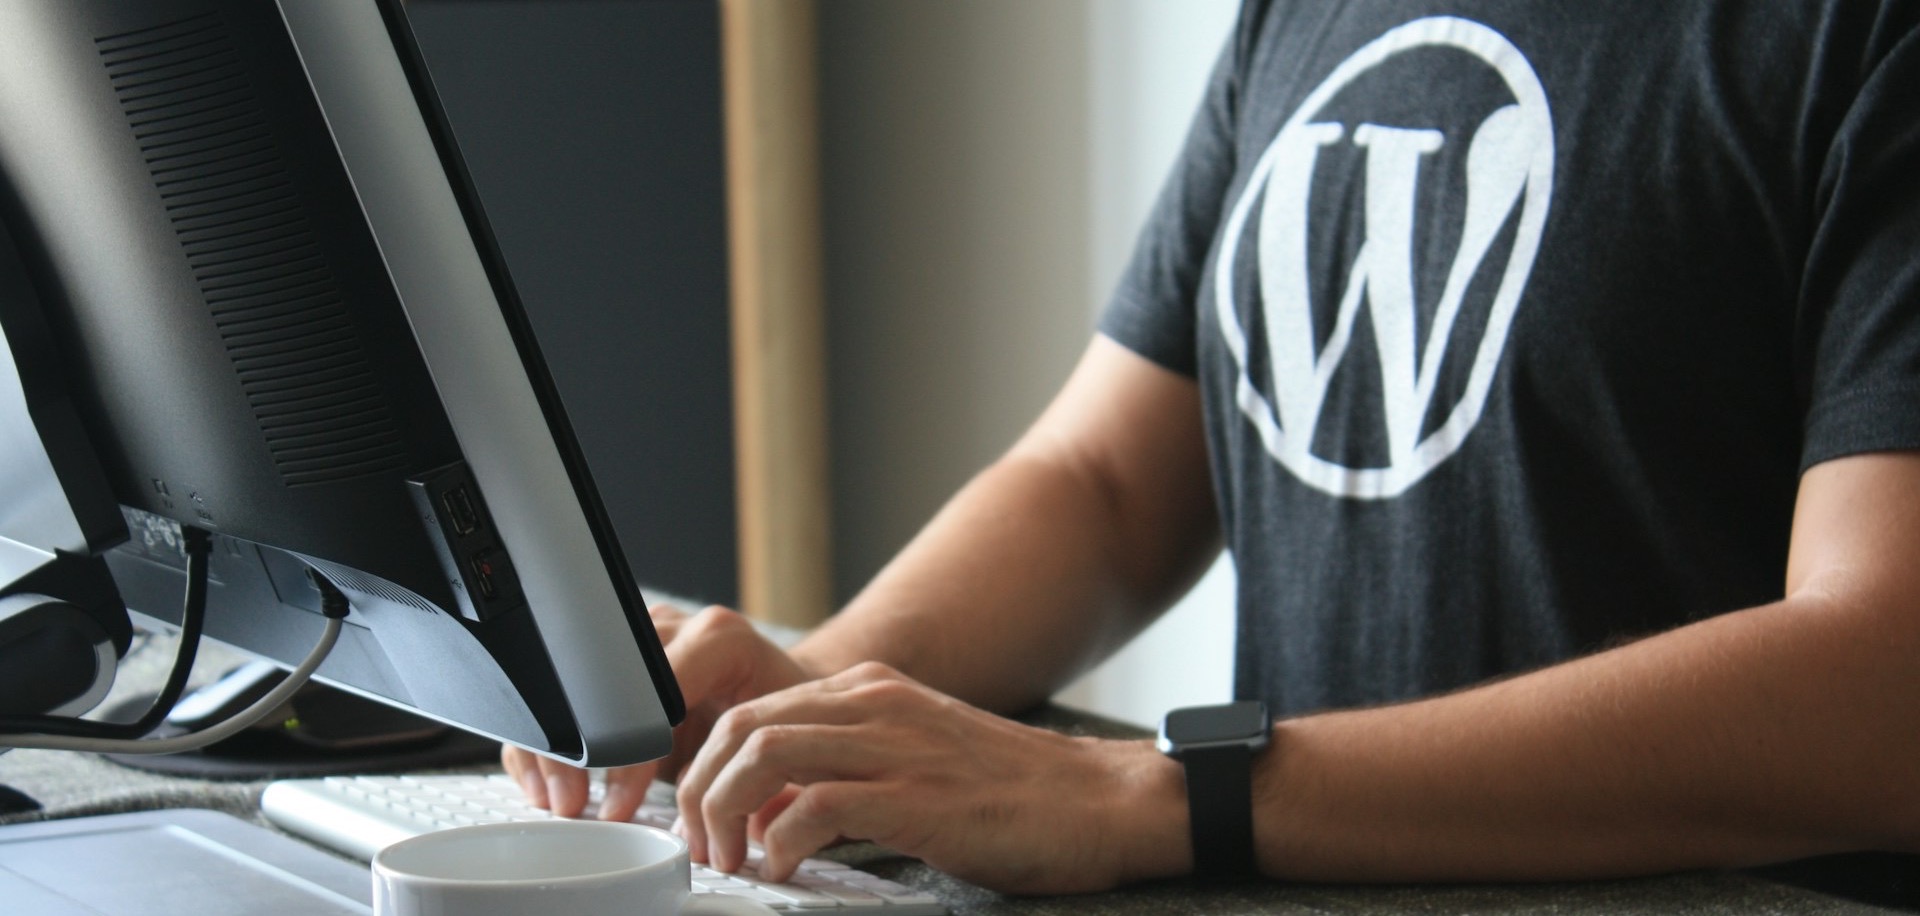 Ten reasons to ditch WordPress for the HubSpot CMS